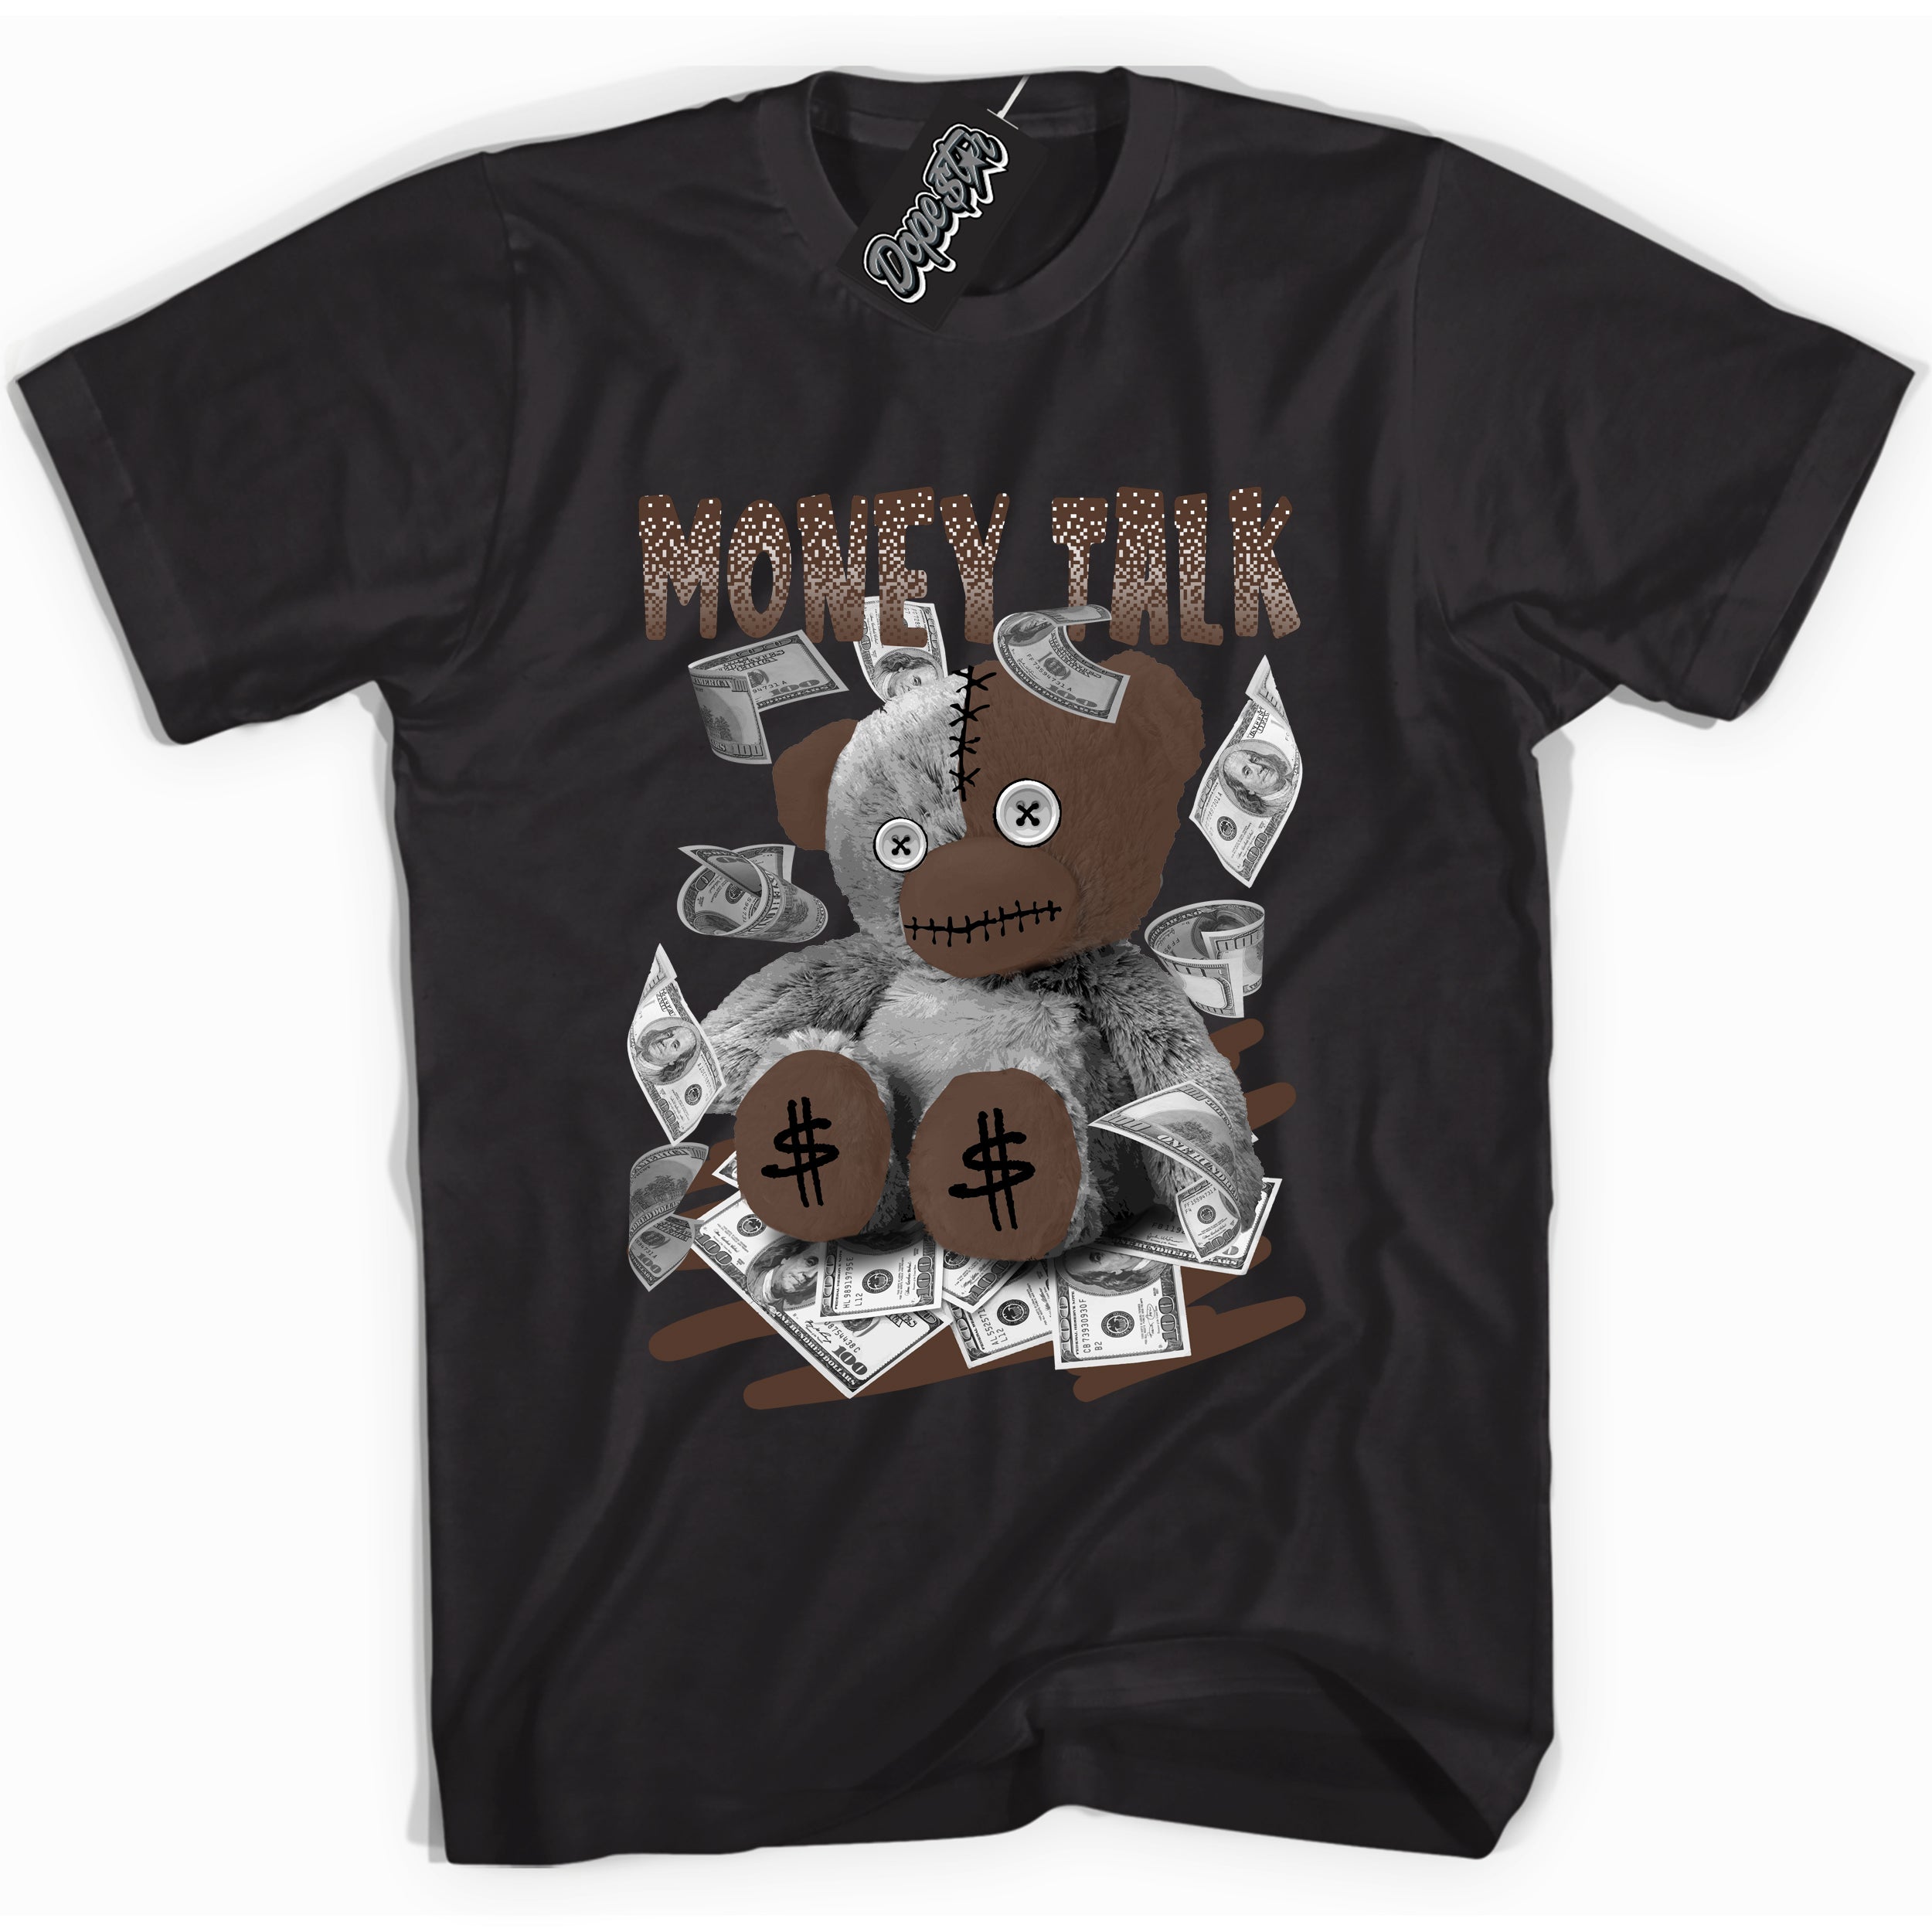 Cool Black graphic tee with “ Money Talk Bear ” design, that perfectly matches Palomino 1s sneakers 